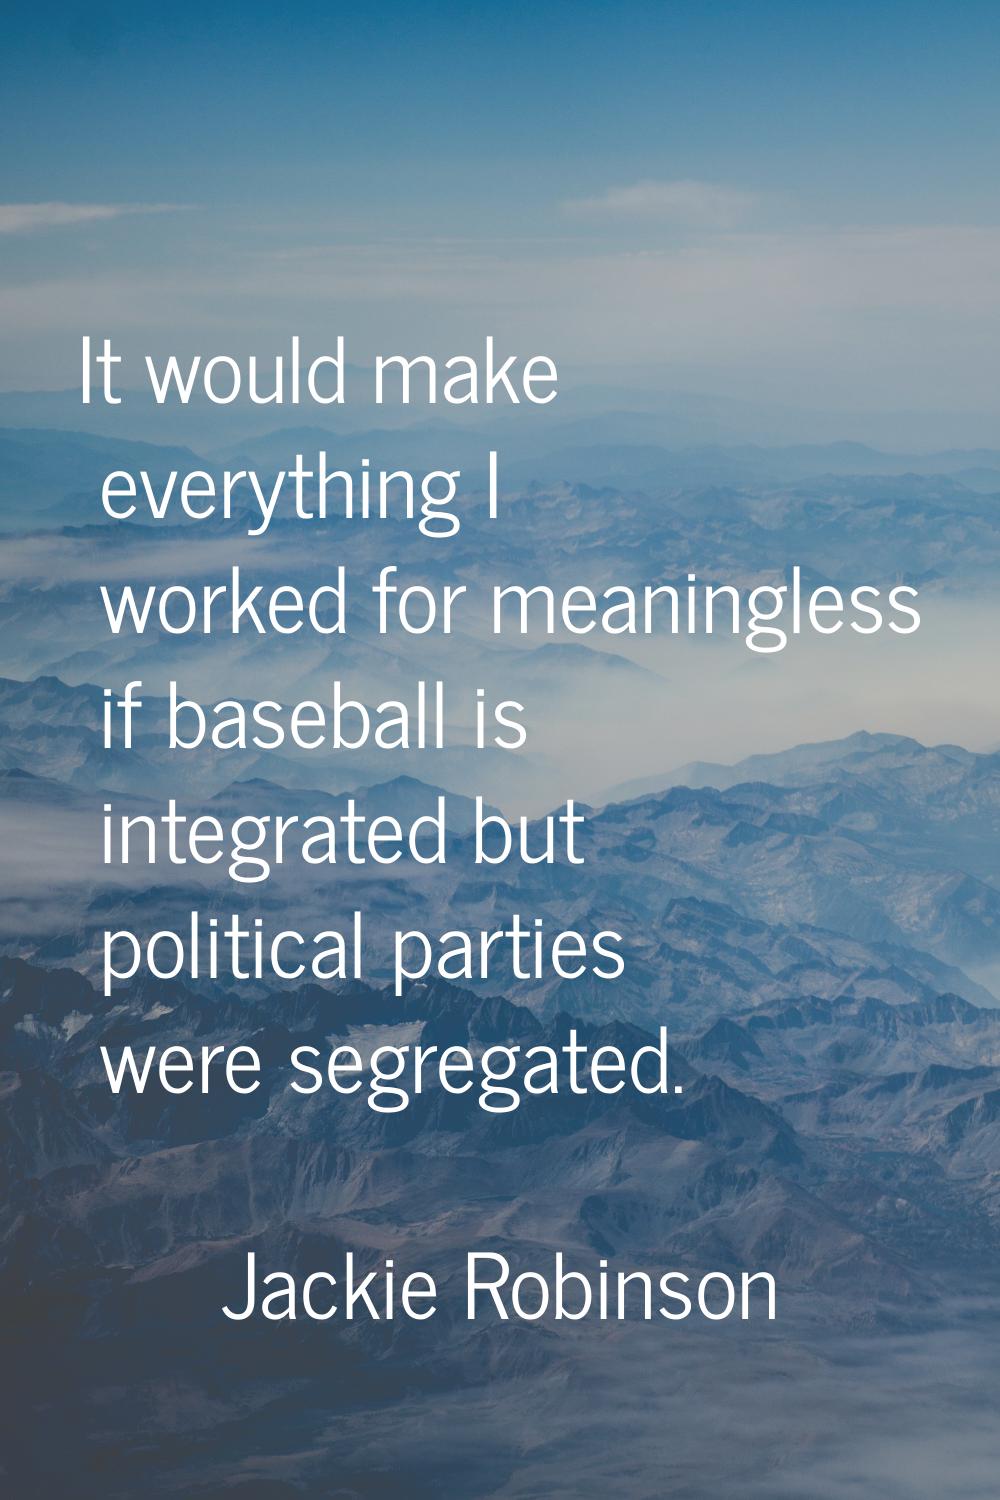 It would make everything I worked for meaningless if baseball is integrated but political parties w